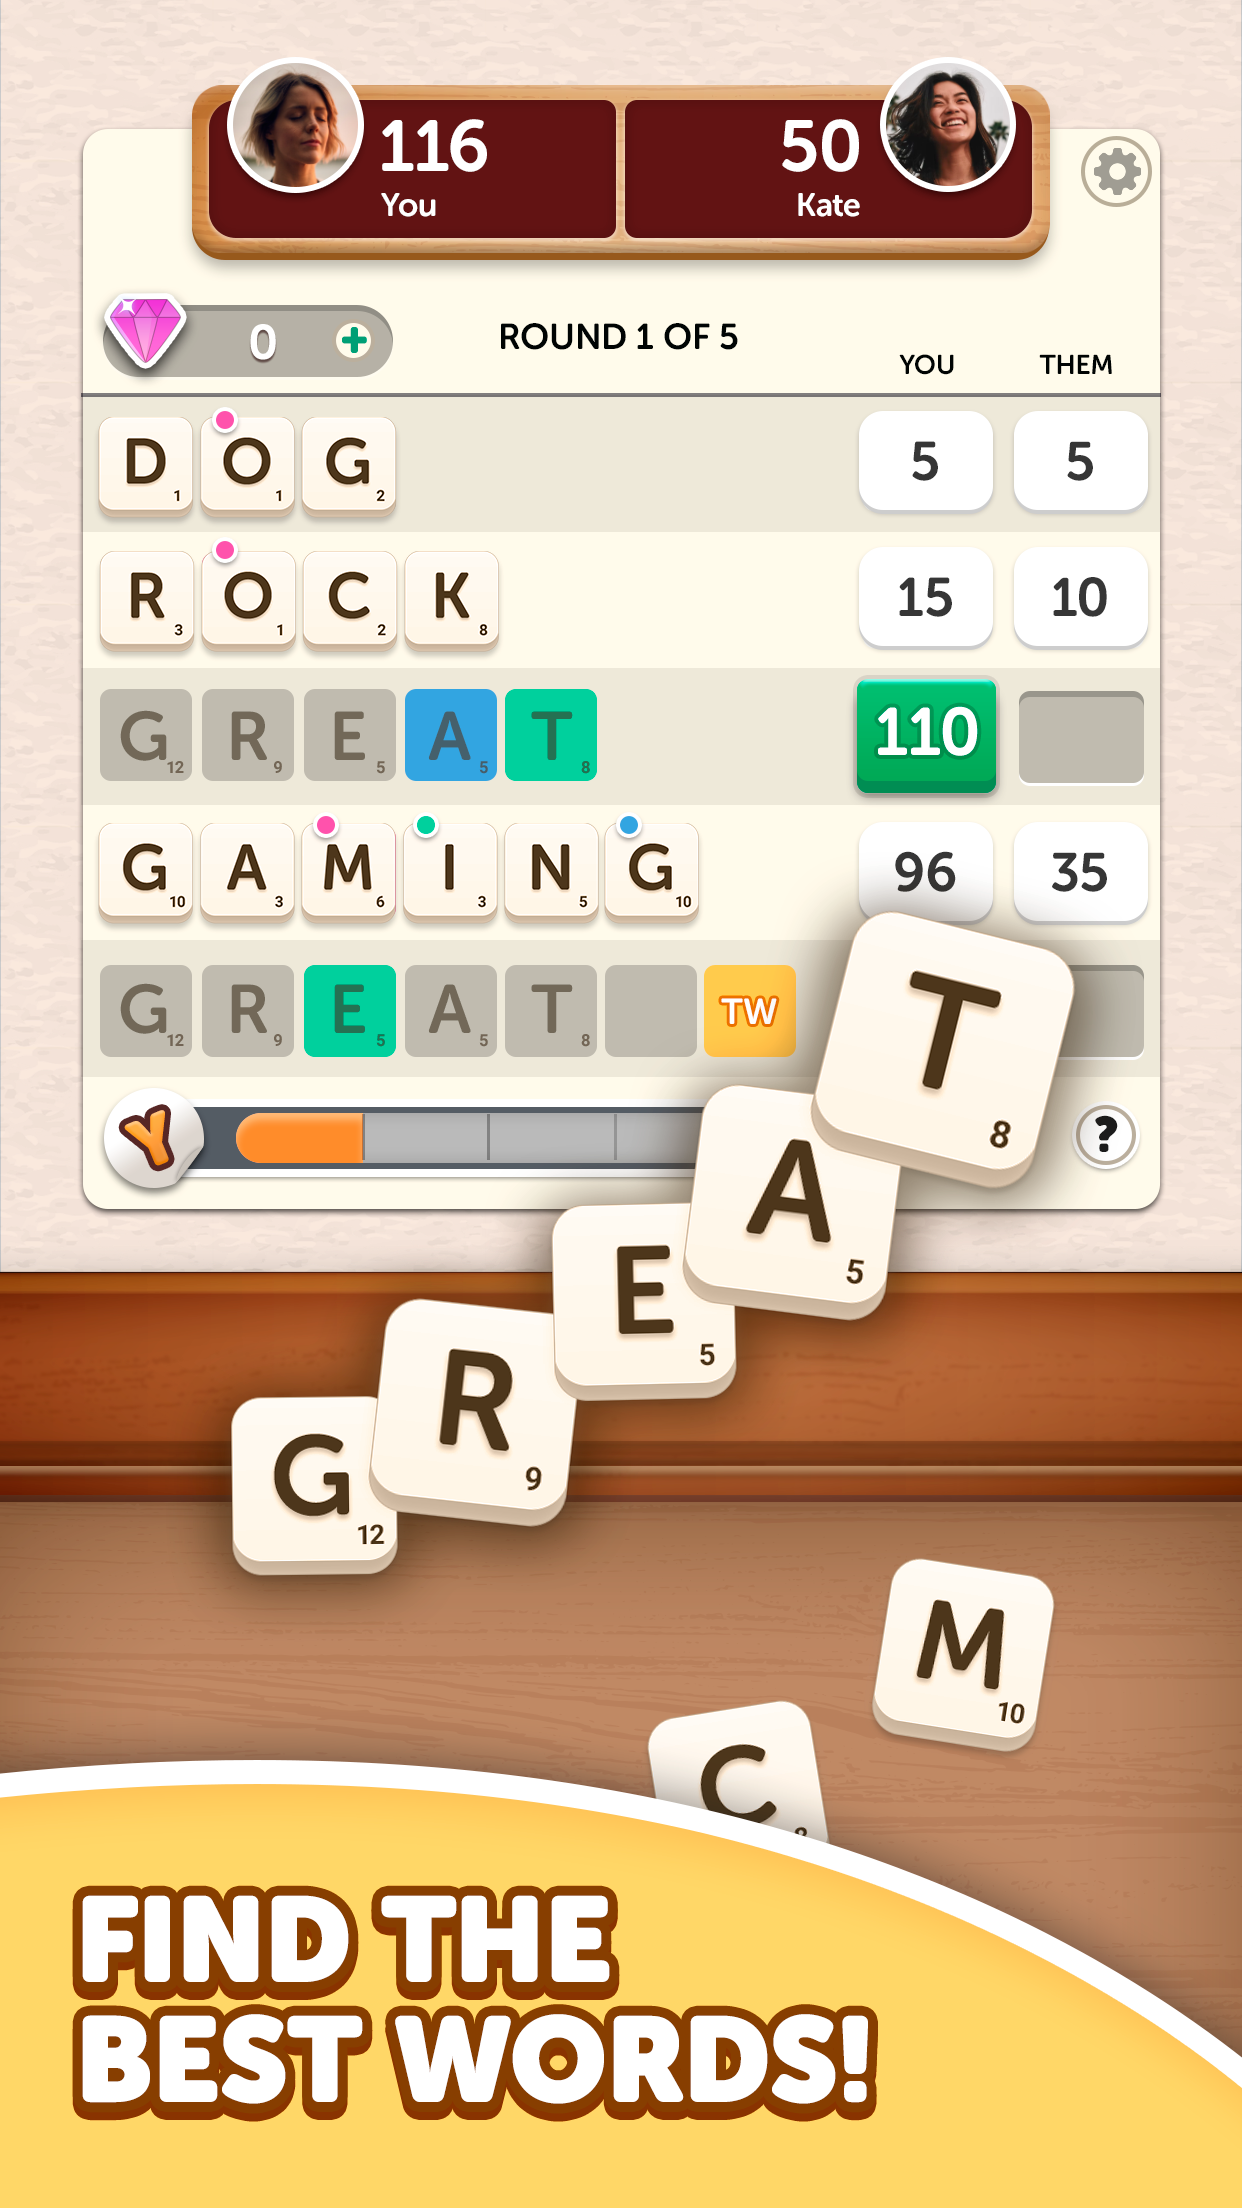 Play Word Yatzy - Fun Word Puzzler Online